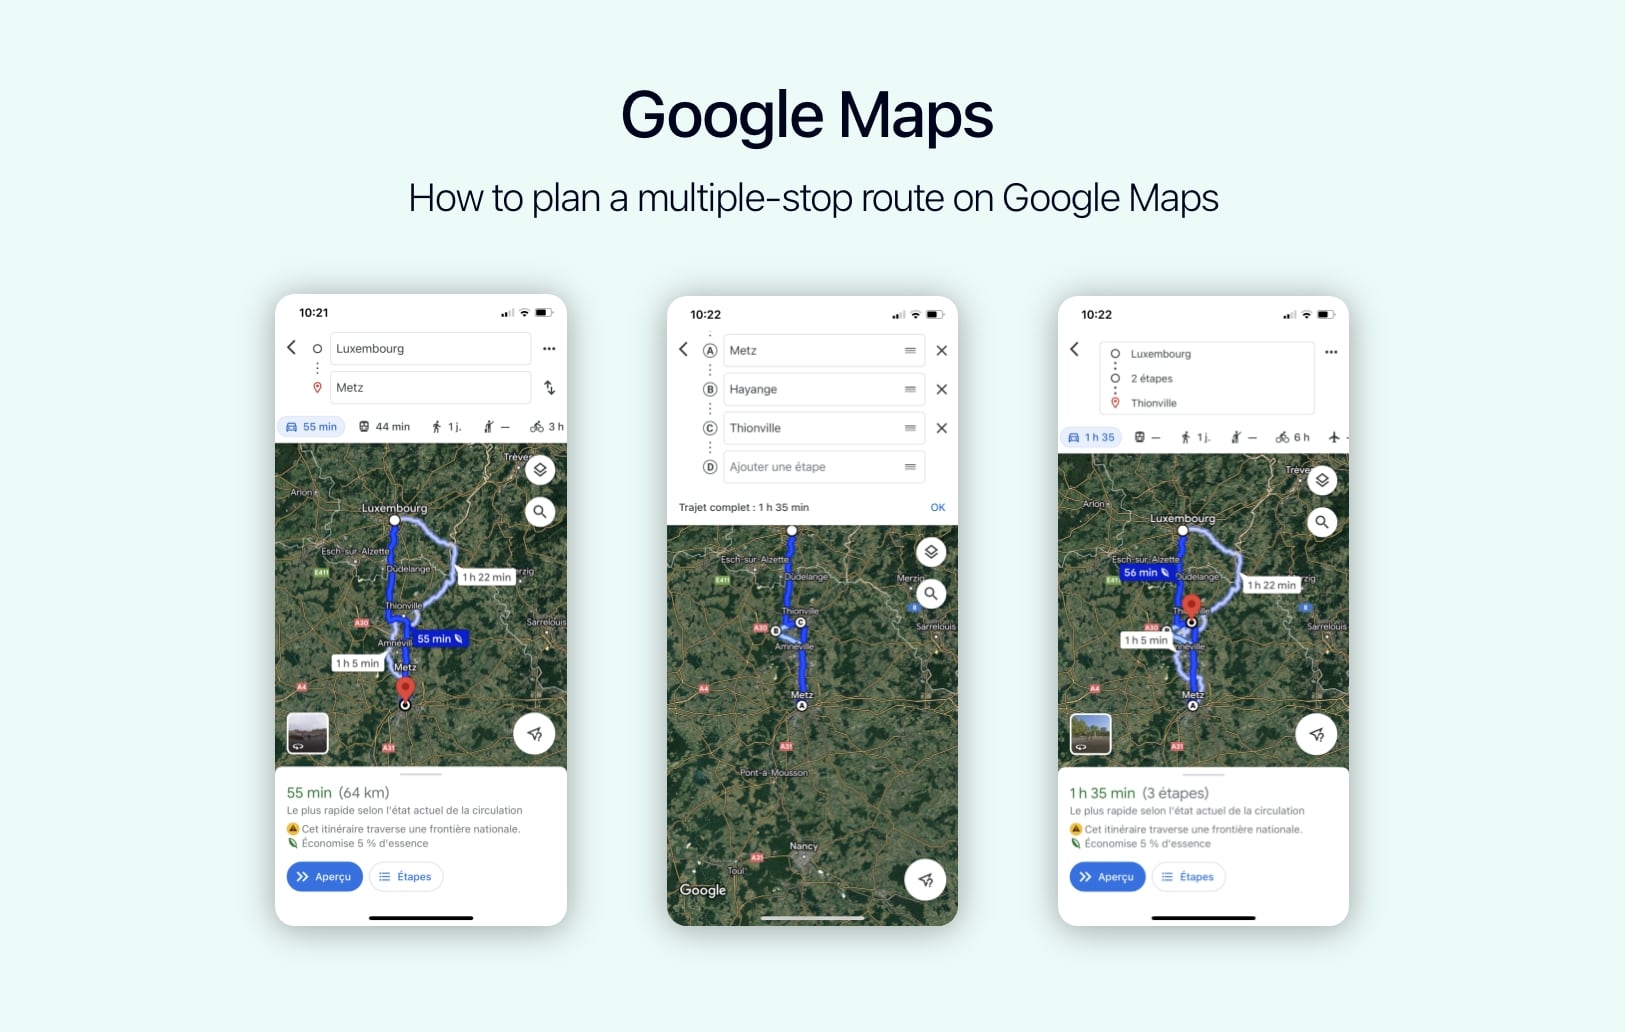 Diagram showing how to plan a multi-stop route on Google Maps.